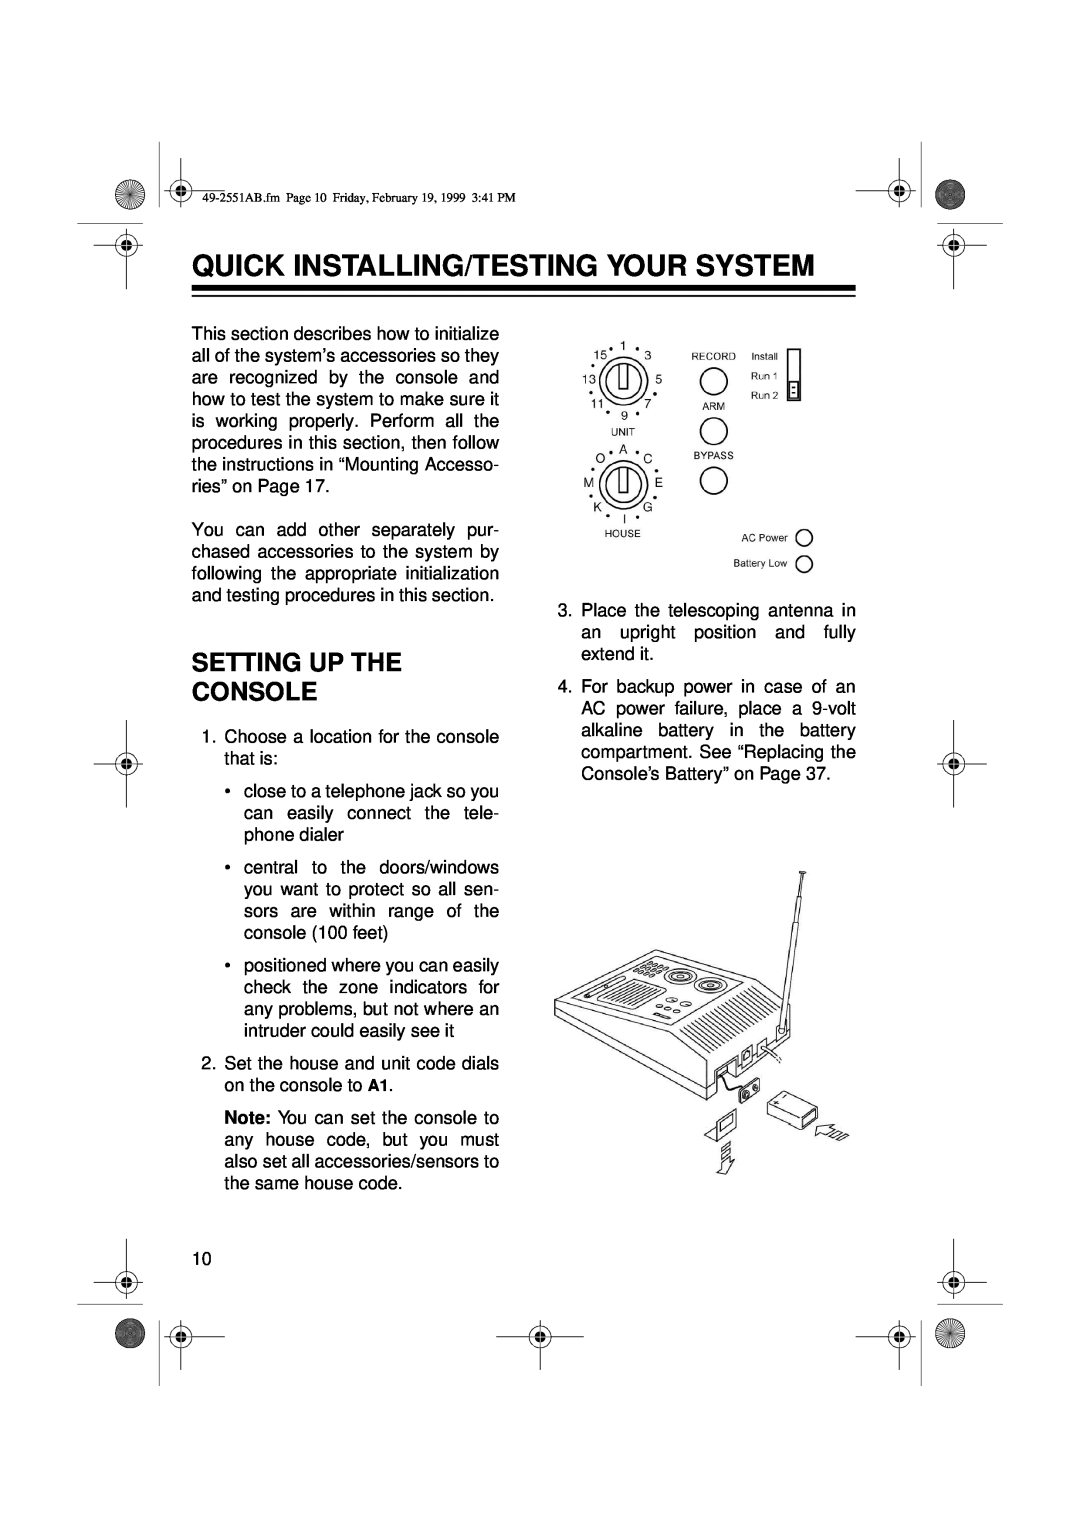 Radio Shack 49-2551A owner manual Quick Installing/Testing Your System, Setting Up The Console 